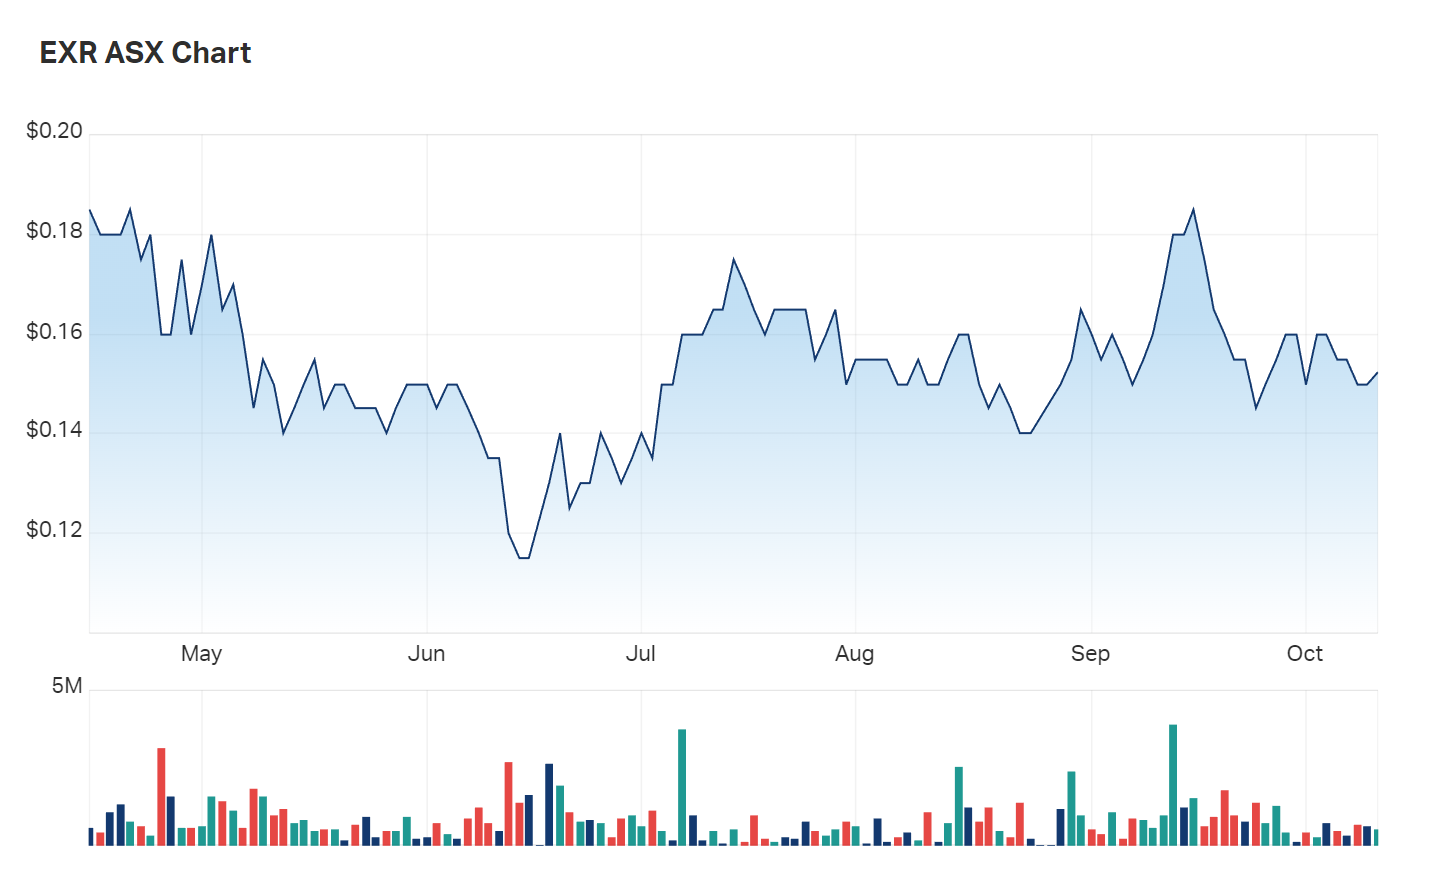 Elixir's six month charts demonstrate the company's share price bouncing back from the June-July 2022 sell-off season 